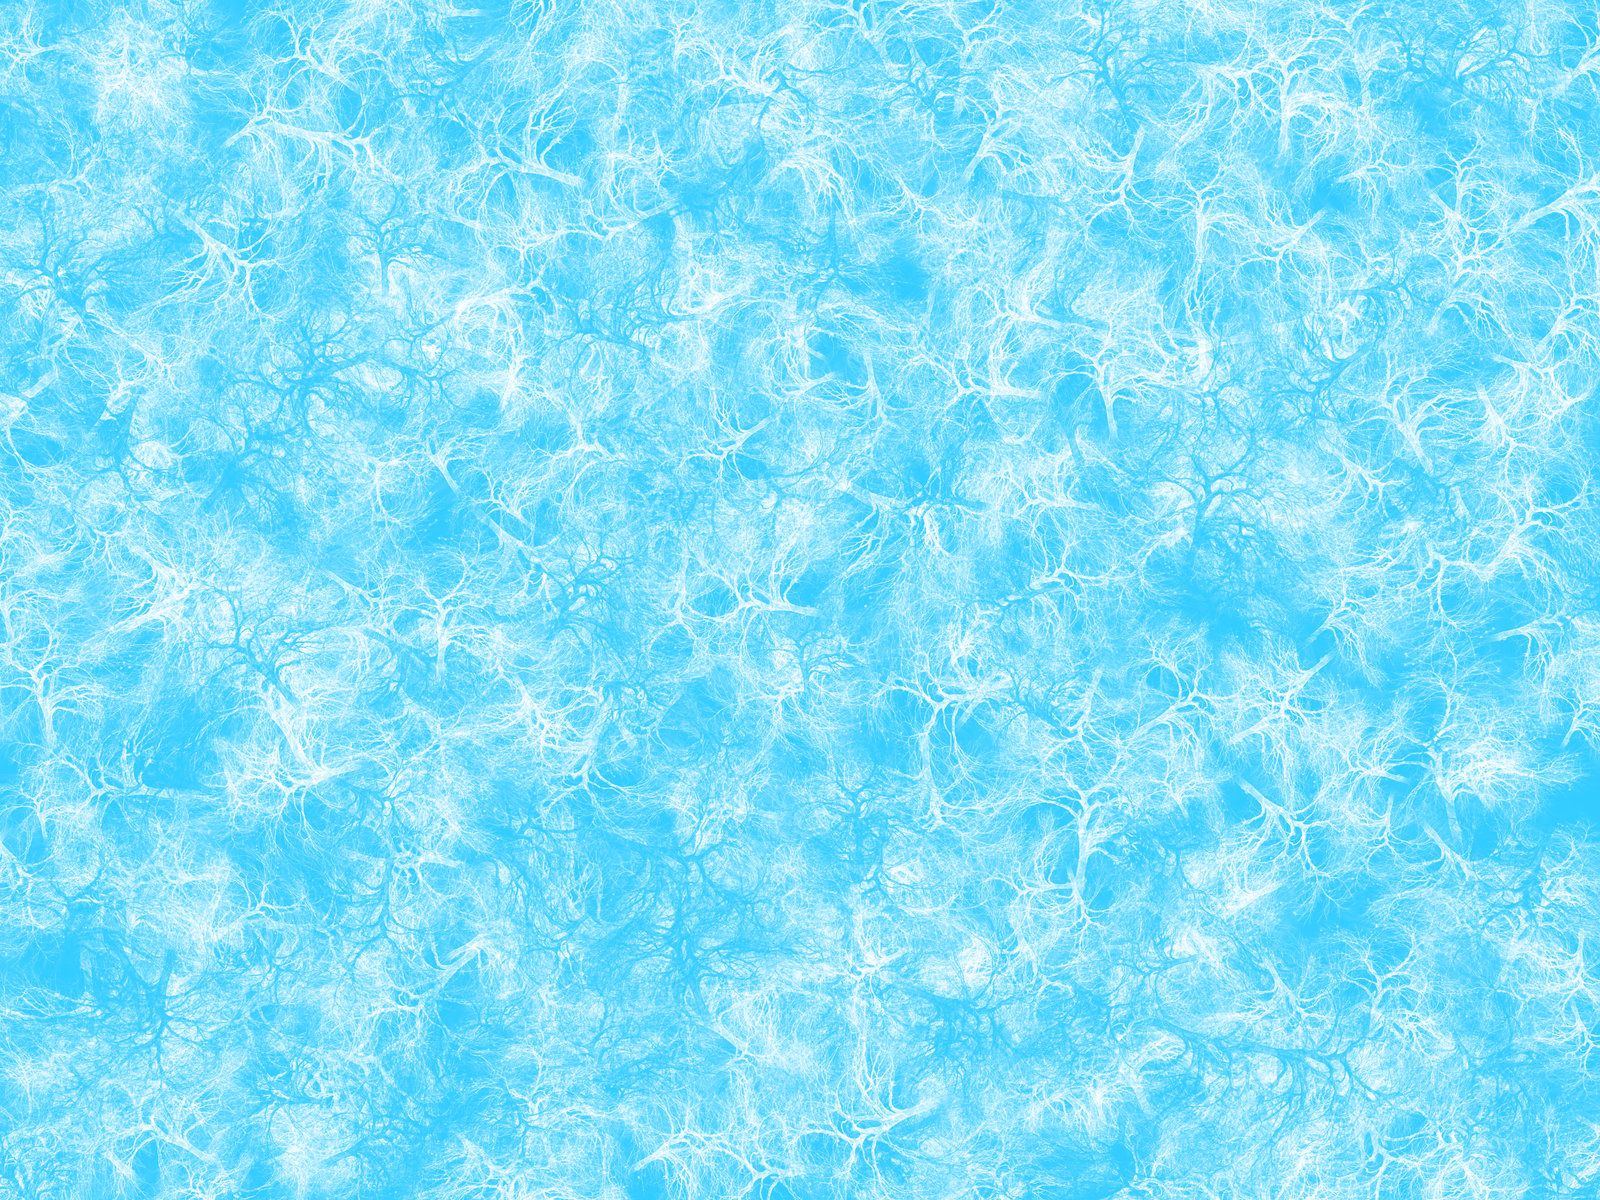 Pretty Blue Tumblr Backgrounds